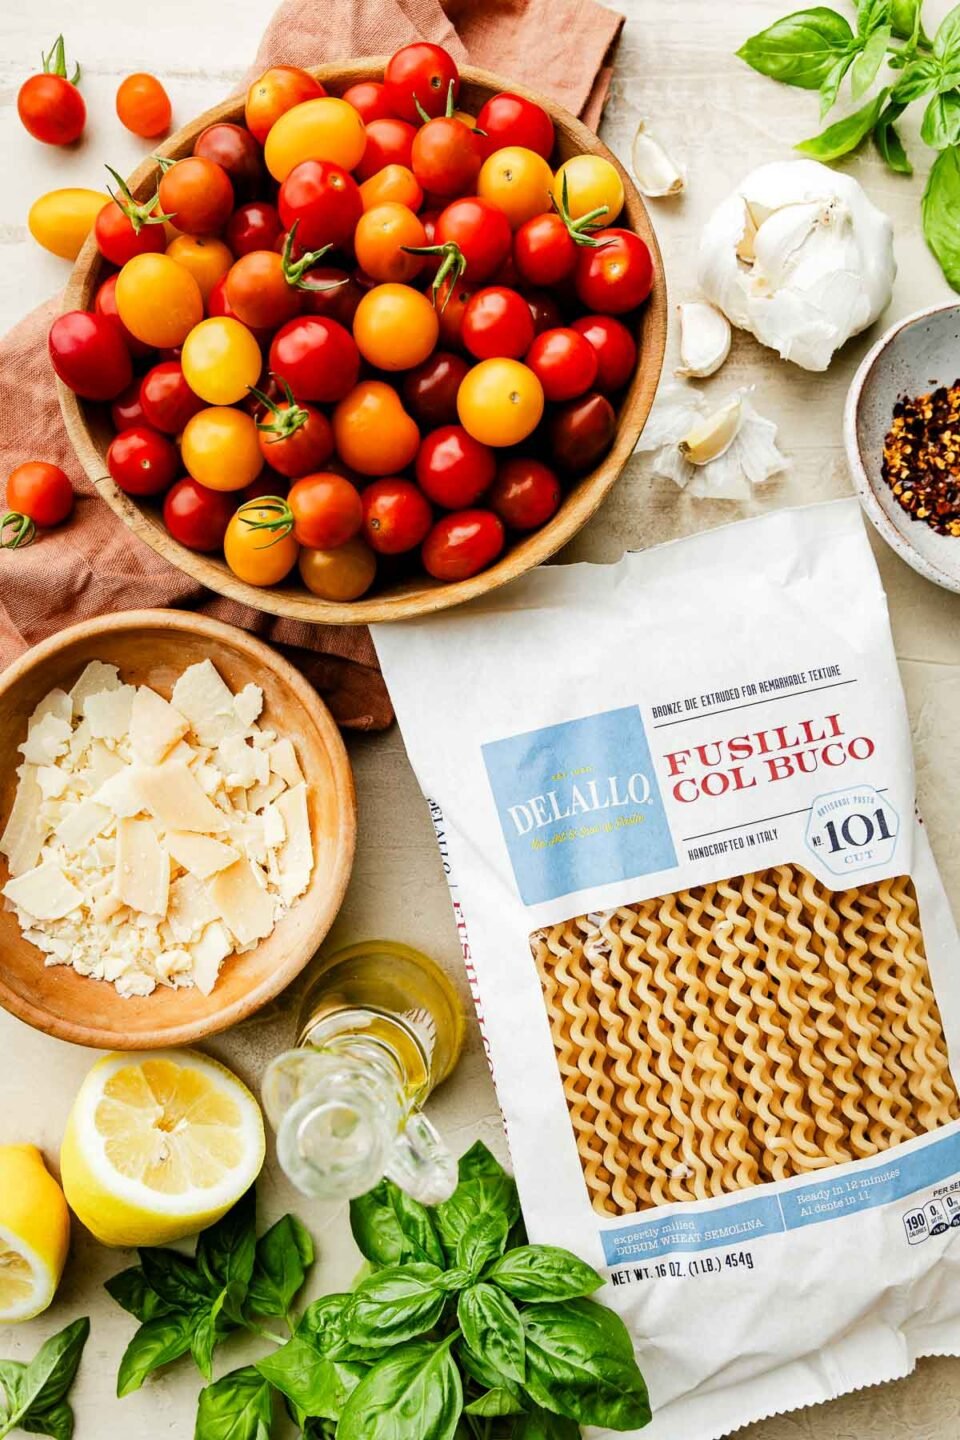 An overhead shot of ingredients displayed on an off-white surface: a bag of fusilli pasta, a bowl of cherry tomatoes, basil, lemon, garlic, red pepper flakes, and shaved parmesan.